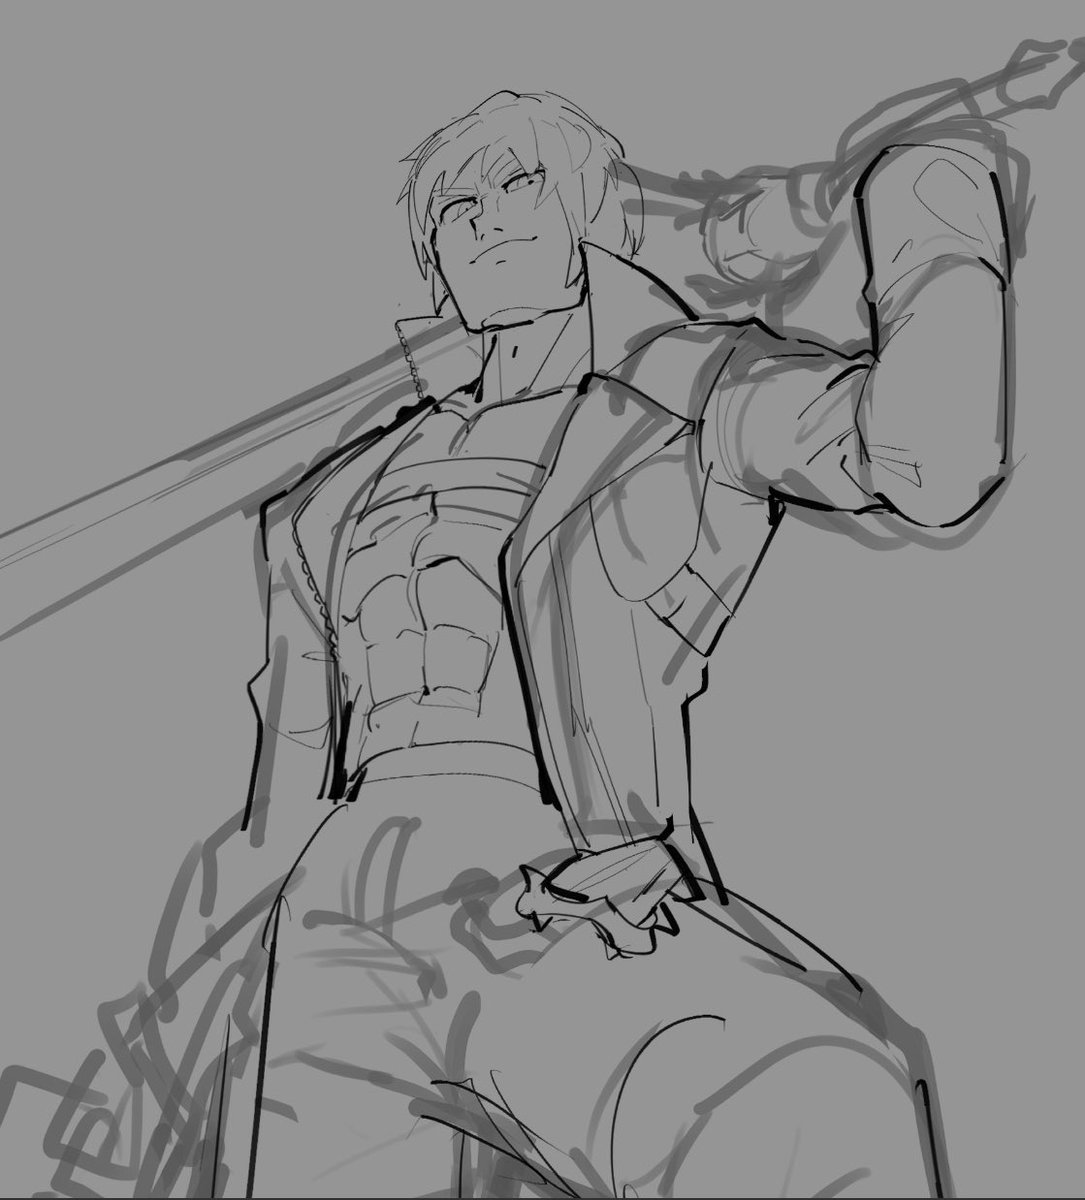 Been having a dmc mind rot as of late